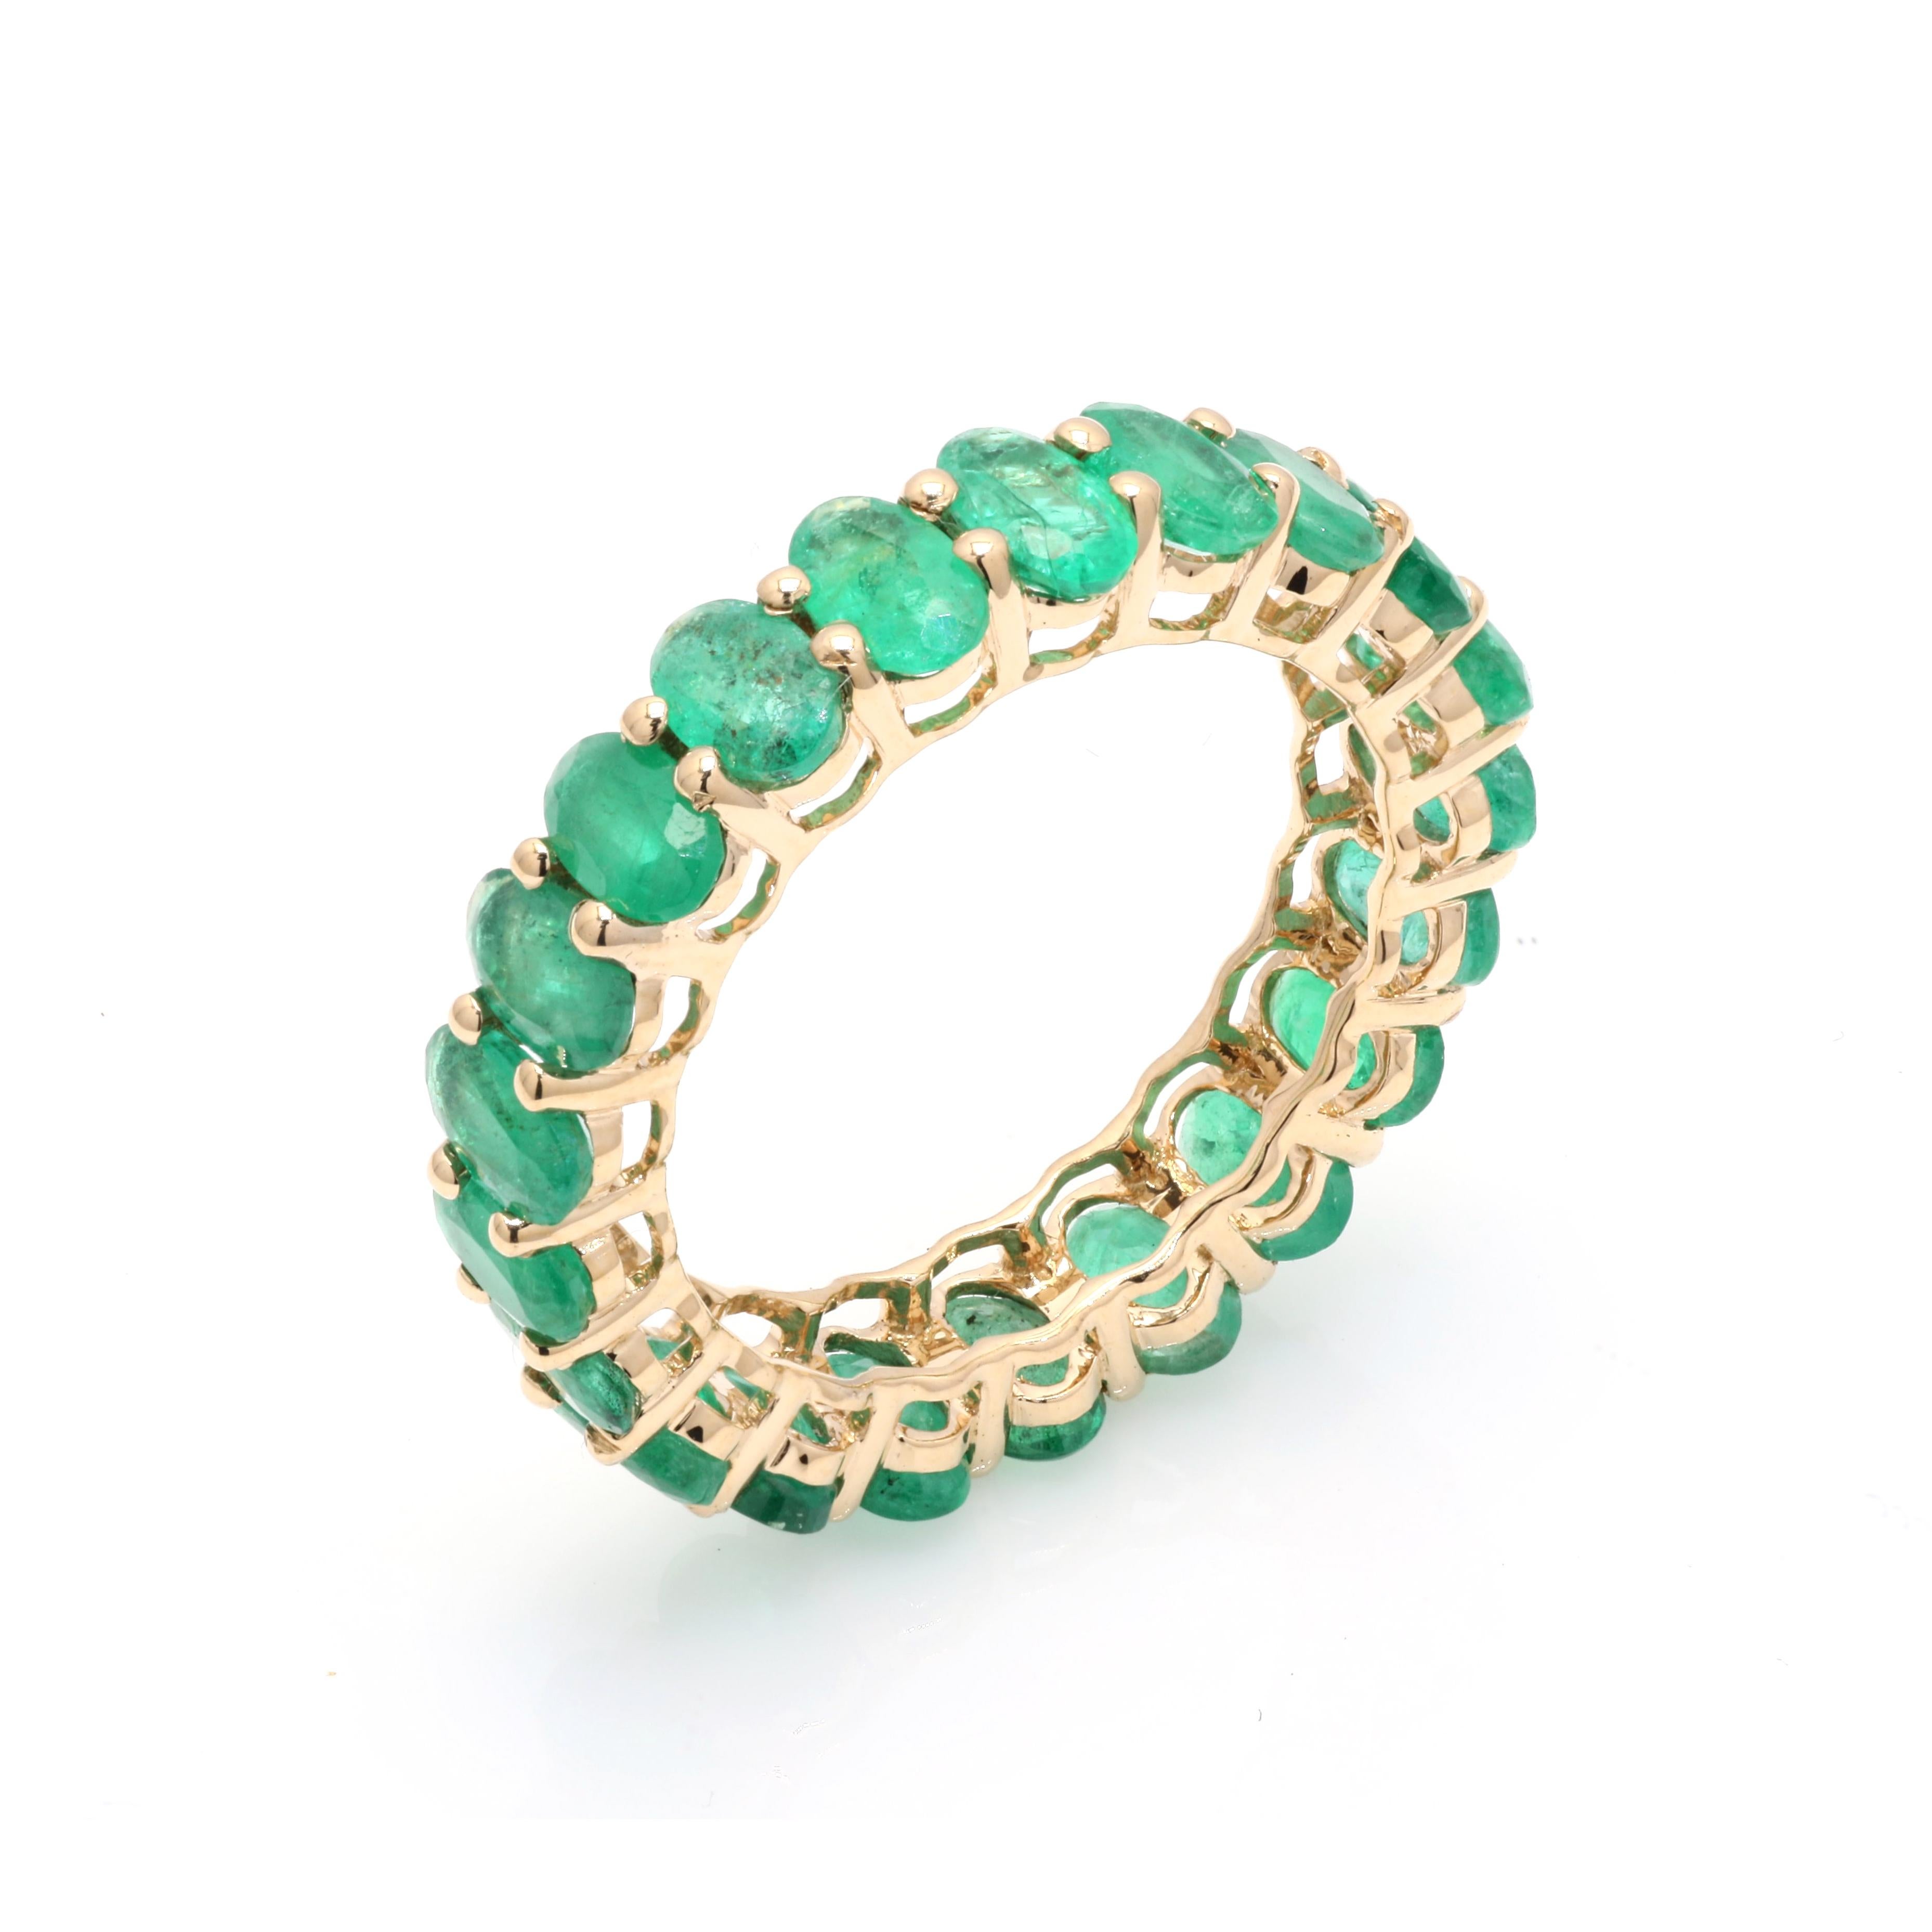 For Sale:  14 Karat Yellow Gold 4.63 ct Oval Cut Emerald Gemstone Eternity Band Ring 2